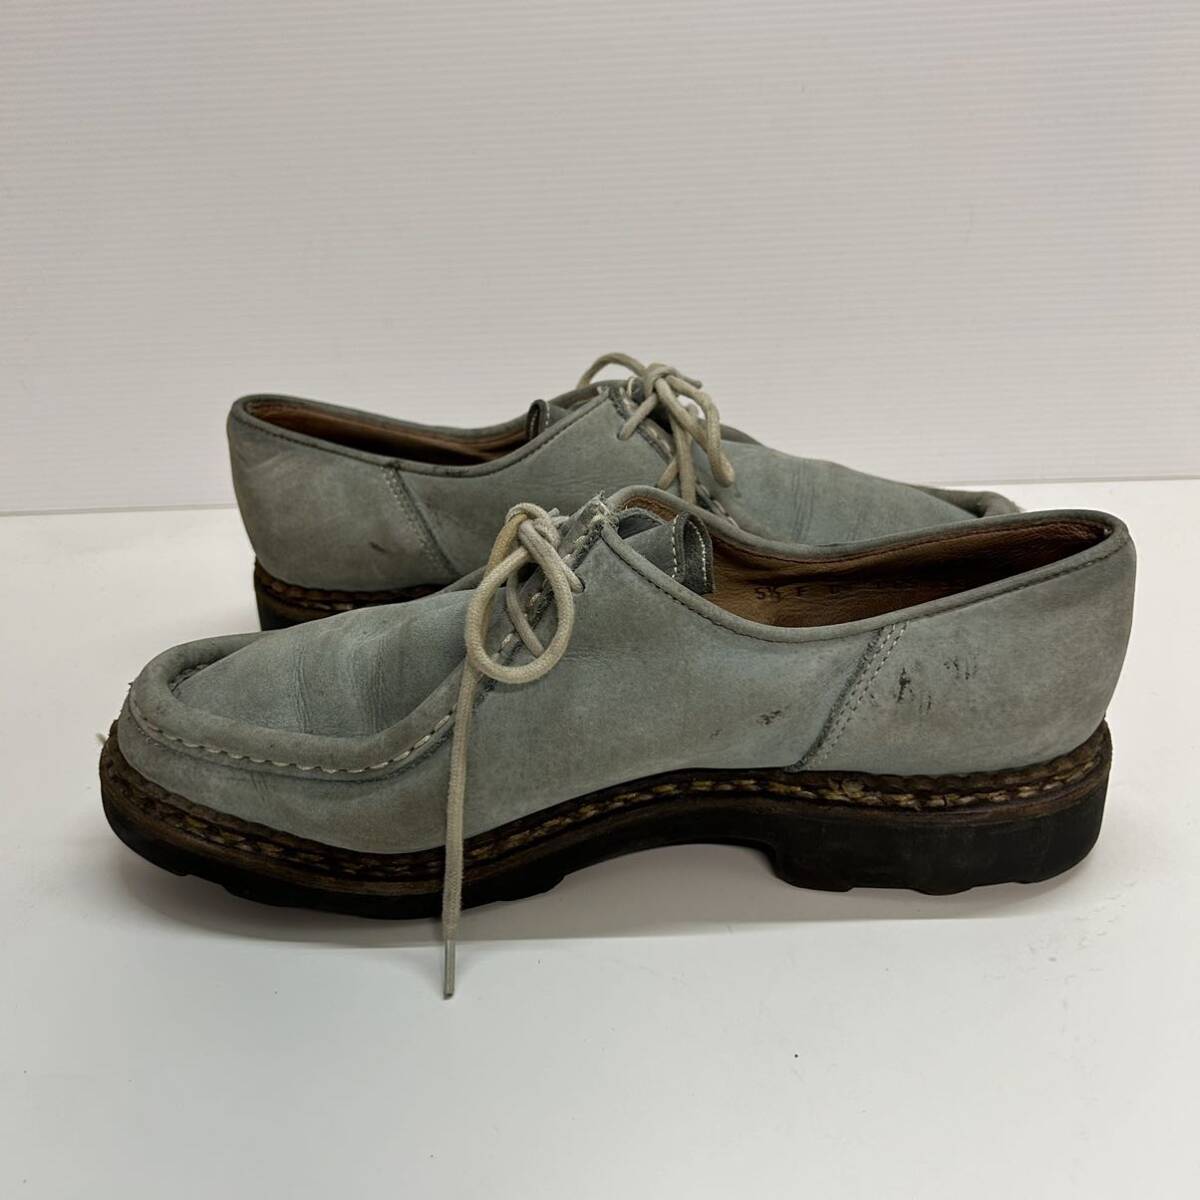 C127 Paraboot Paraboot men's wala Be moccasin Loafer US5.5 approximately 23.5cm light blue suede France made 